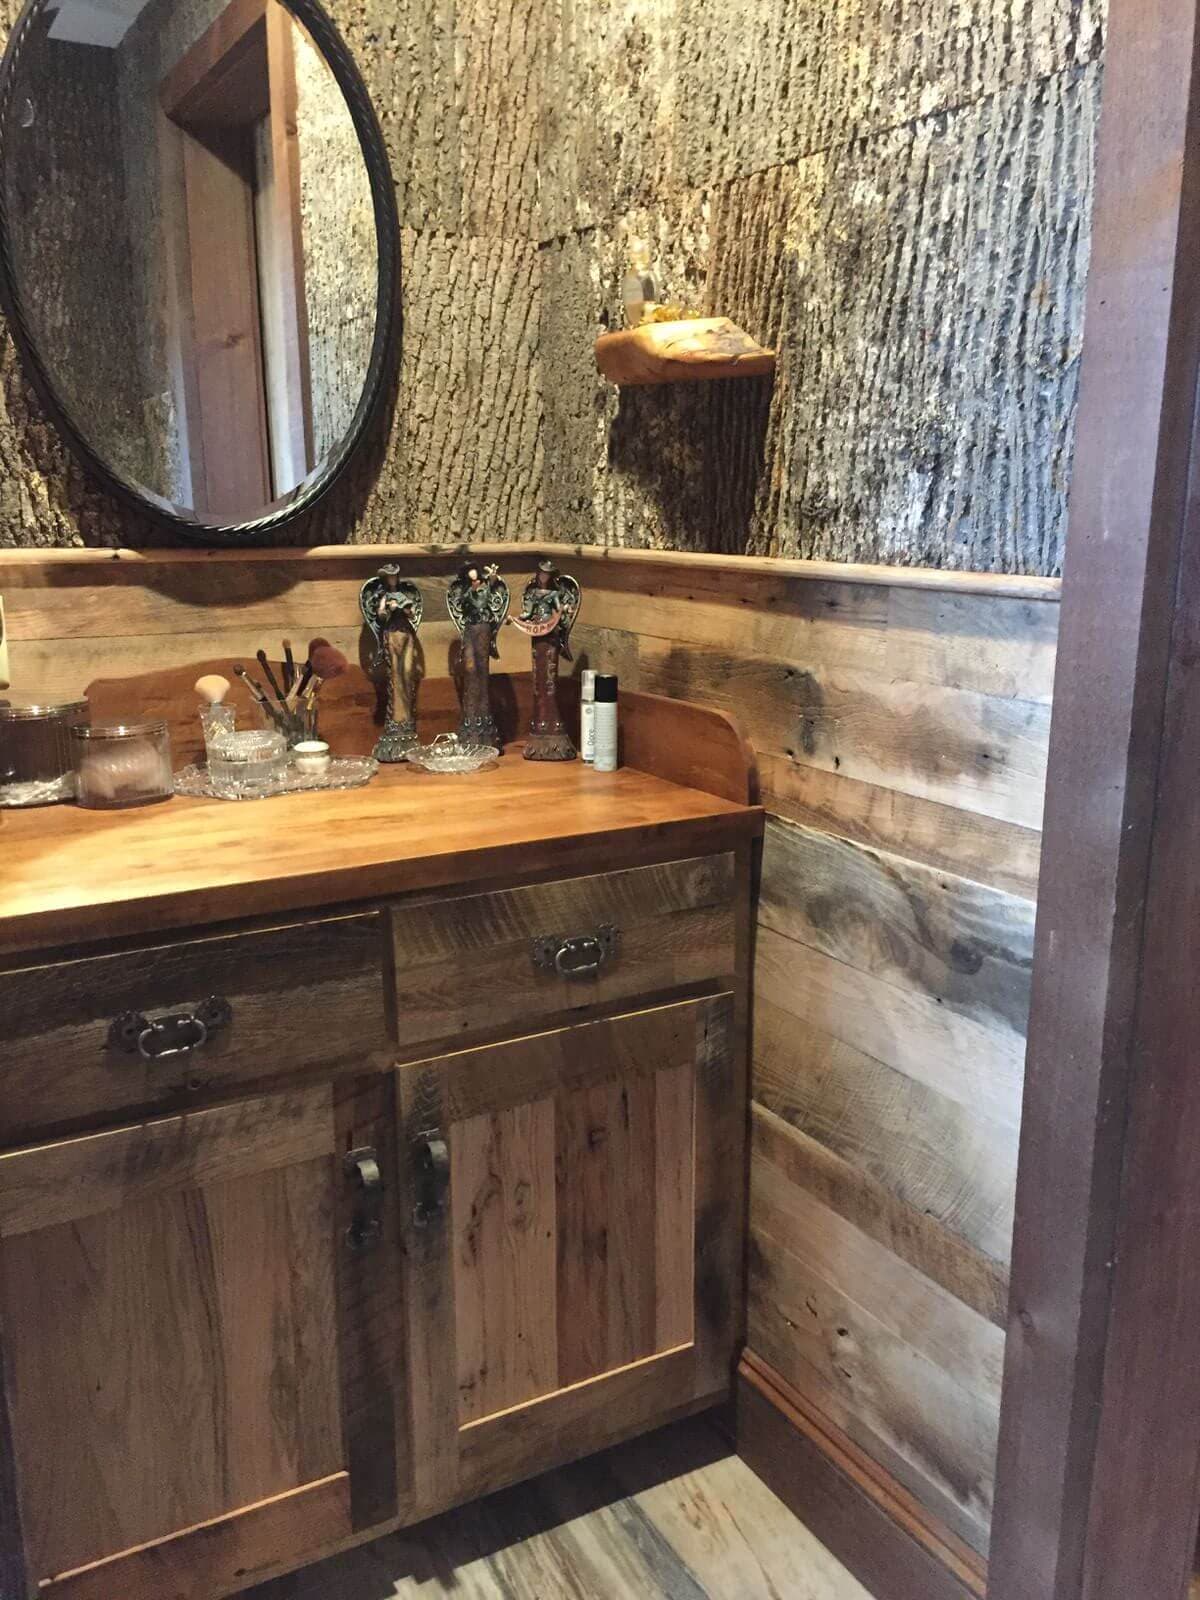 Reclaimed wood character in a bathroom in lake toxaway, nc